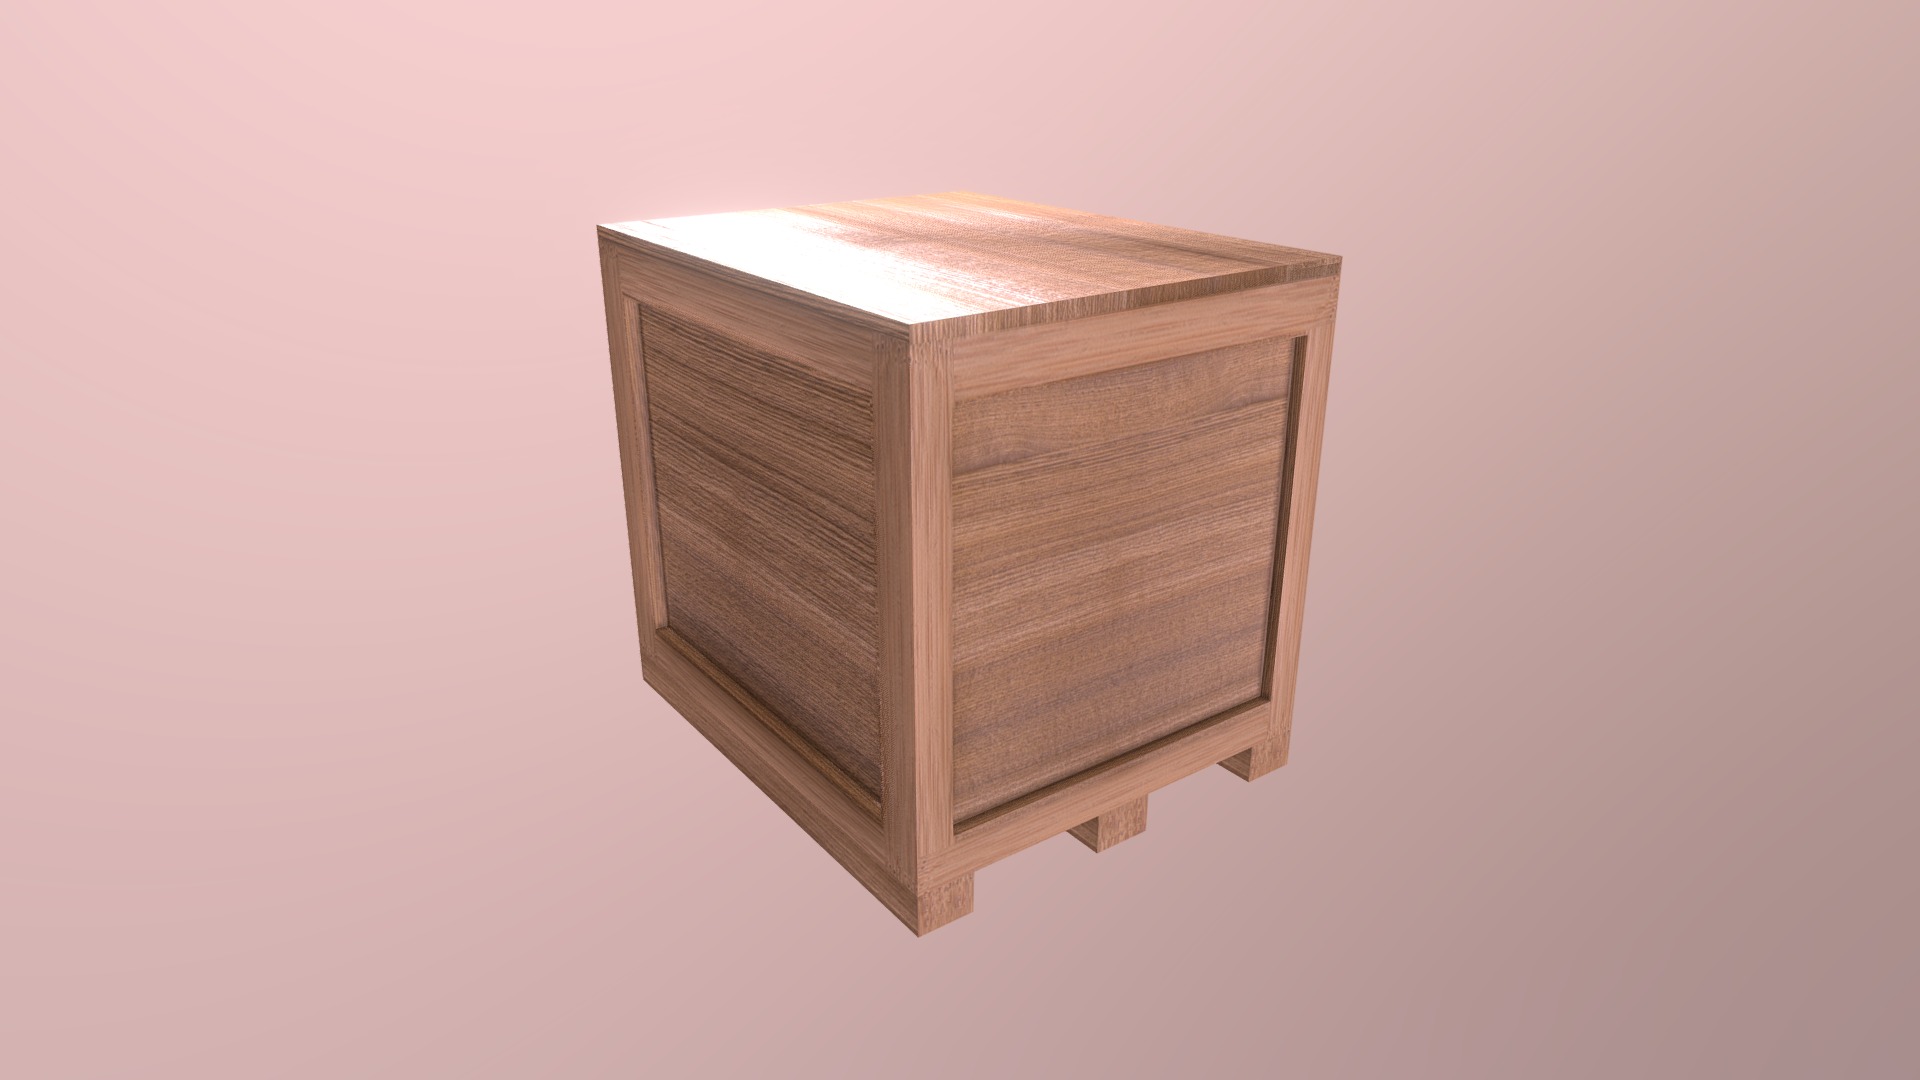 3D model Simple Wooden Crate Low Poly - This is a 3D model of the Simple Wooden Crate Low Poly. The 3D model is about a wooden frame on a wall.